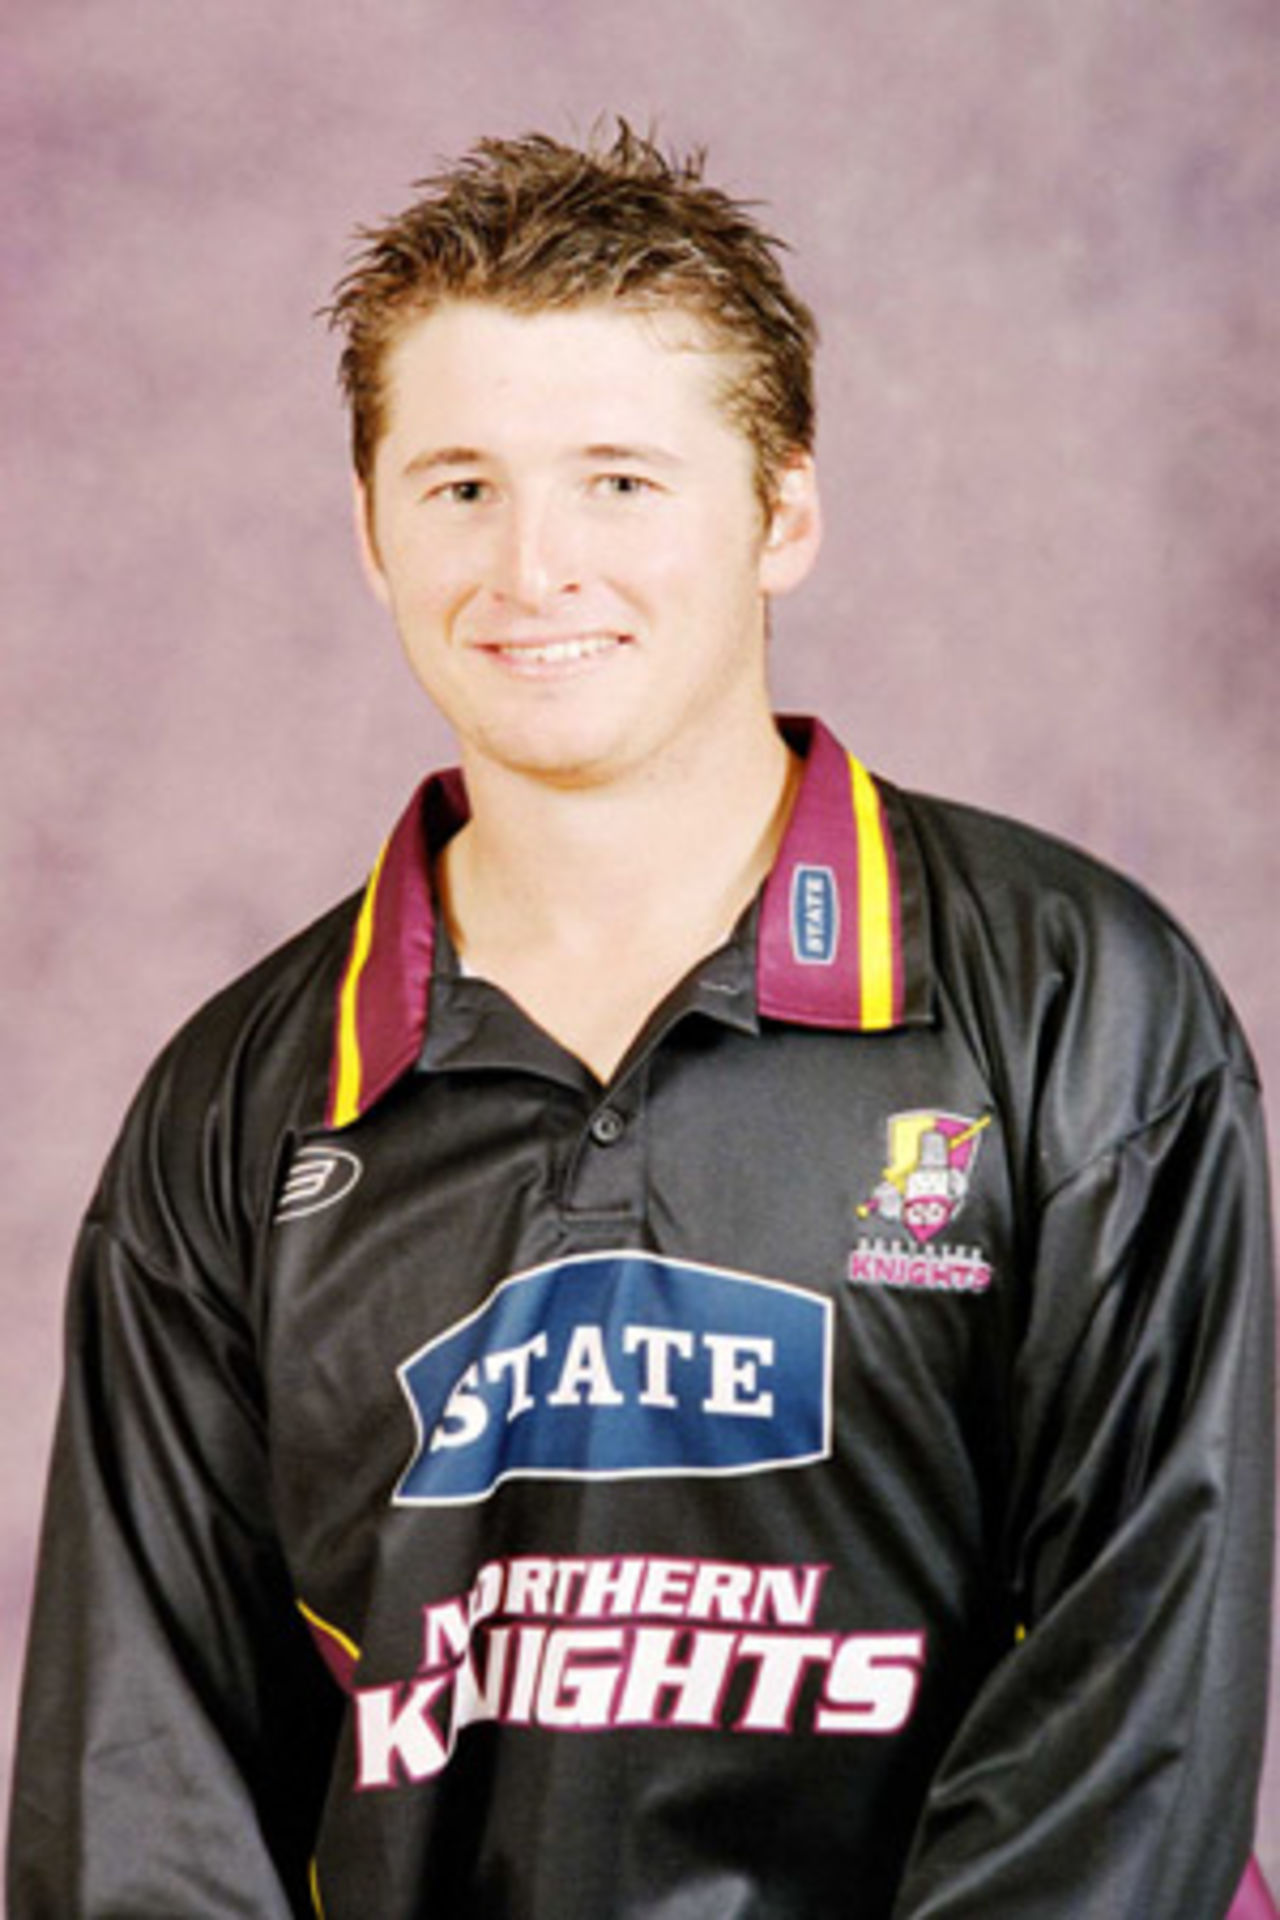 Portrait of Bruce Martin, Northern Districts player in the 2001/02 season.